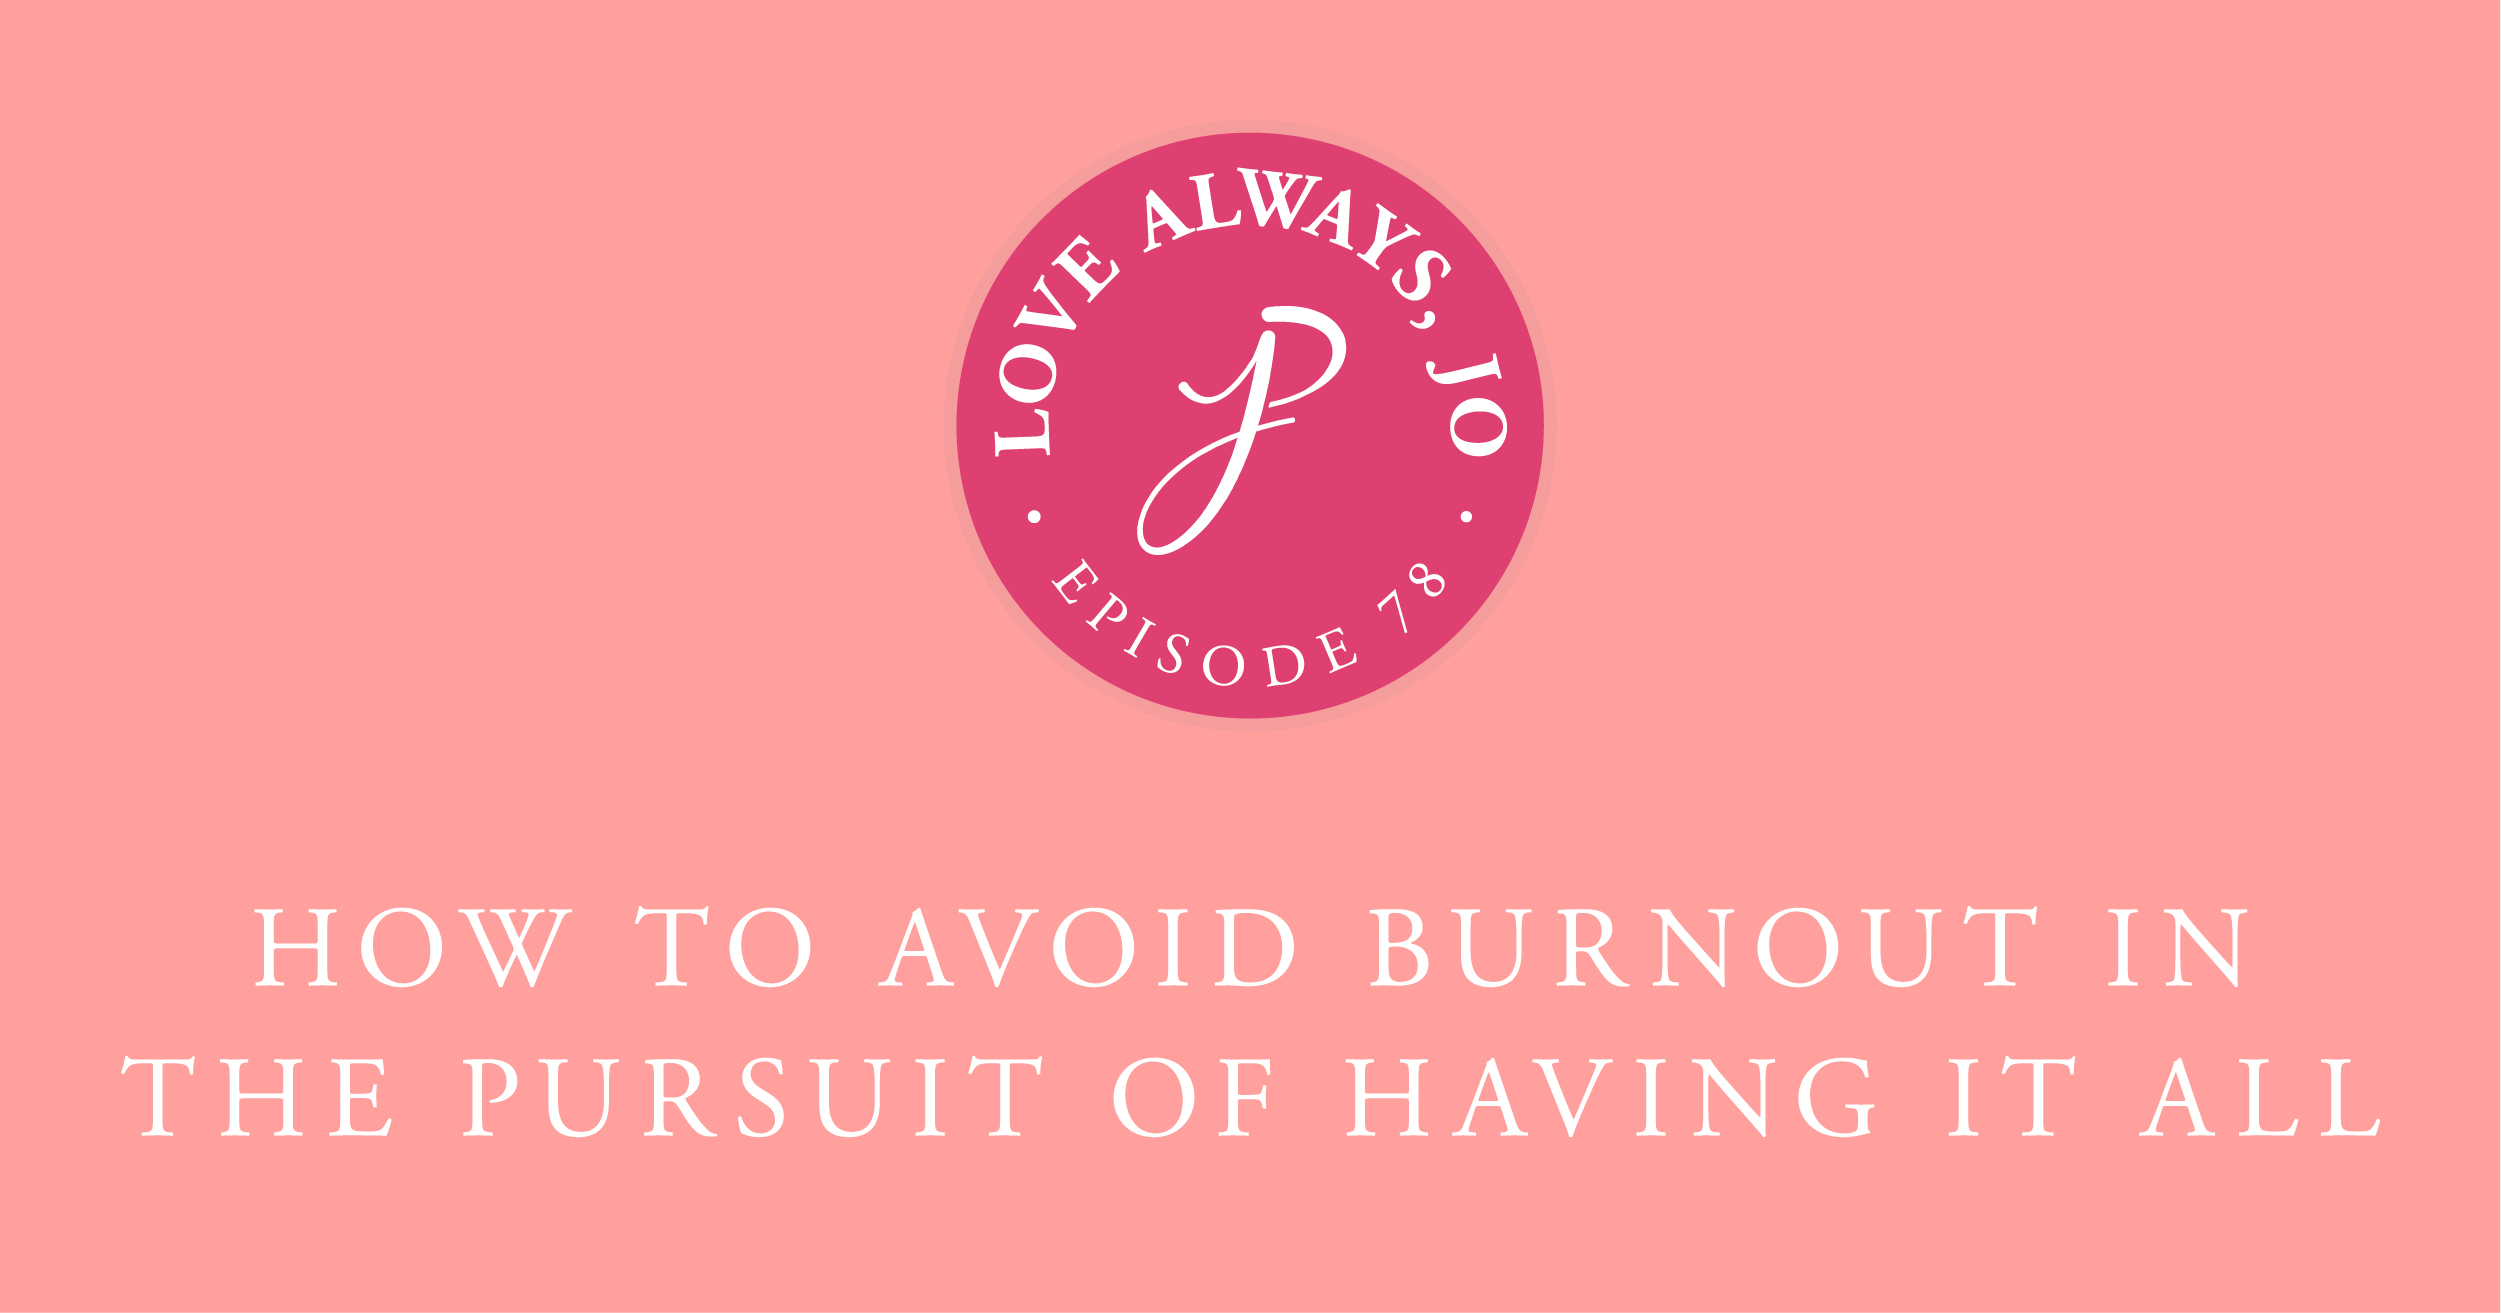 Love Always Jo Episode 78 How To Avoid Burnout in the Pursuit of Having it All